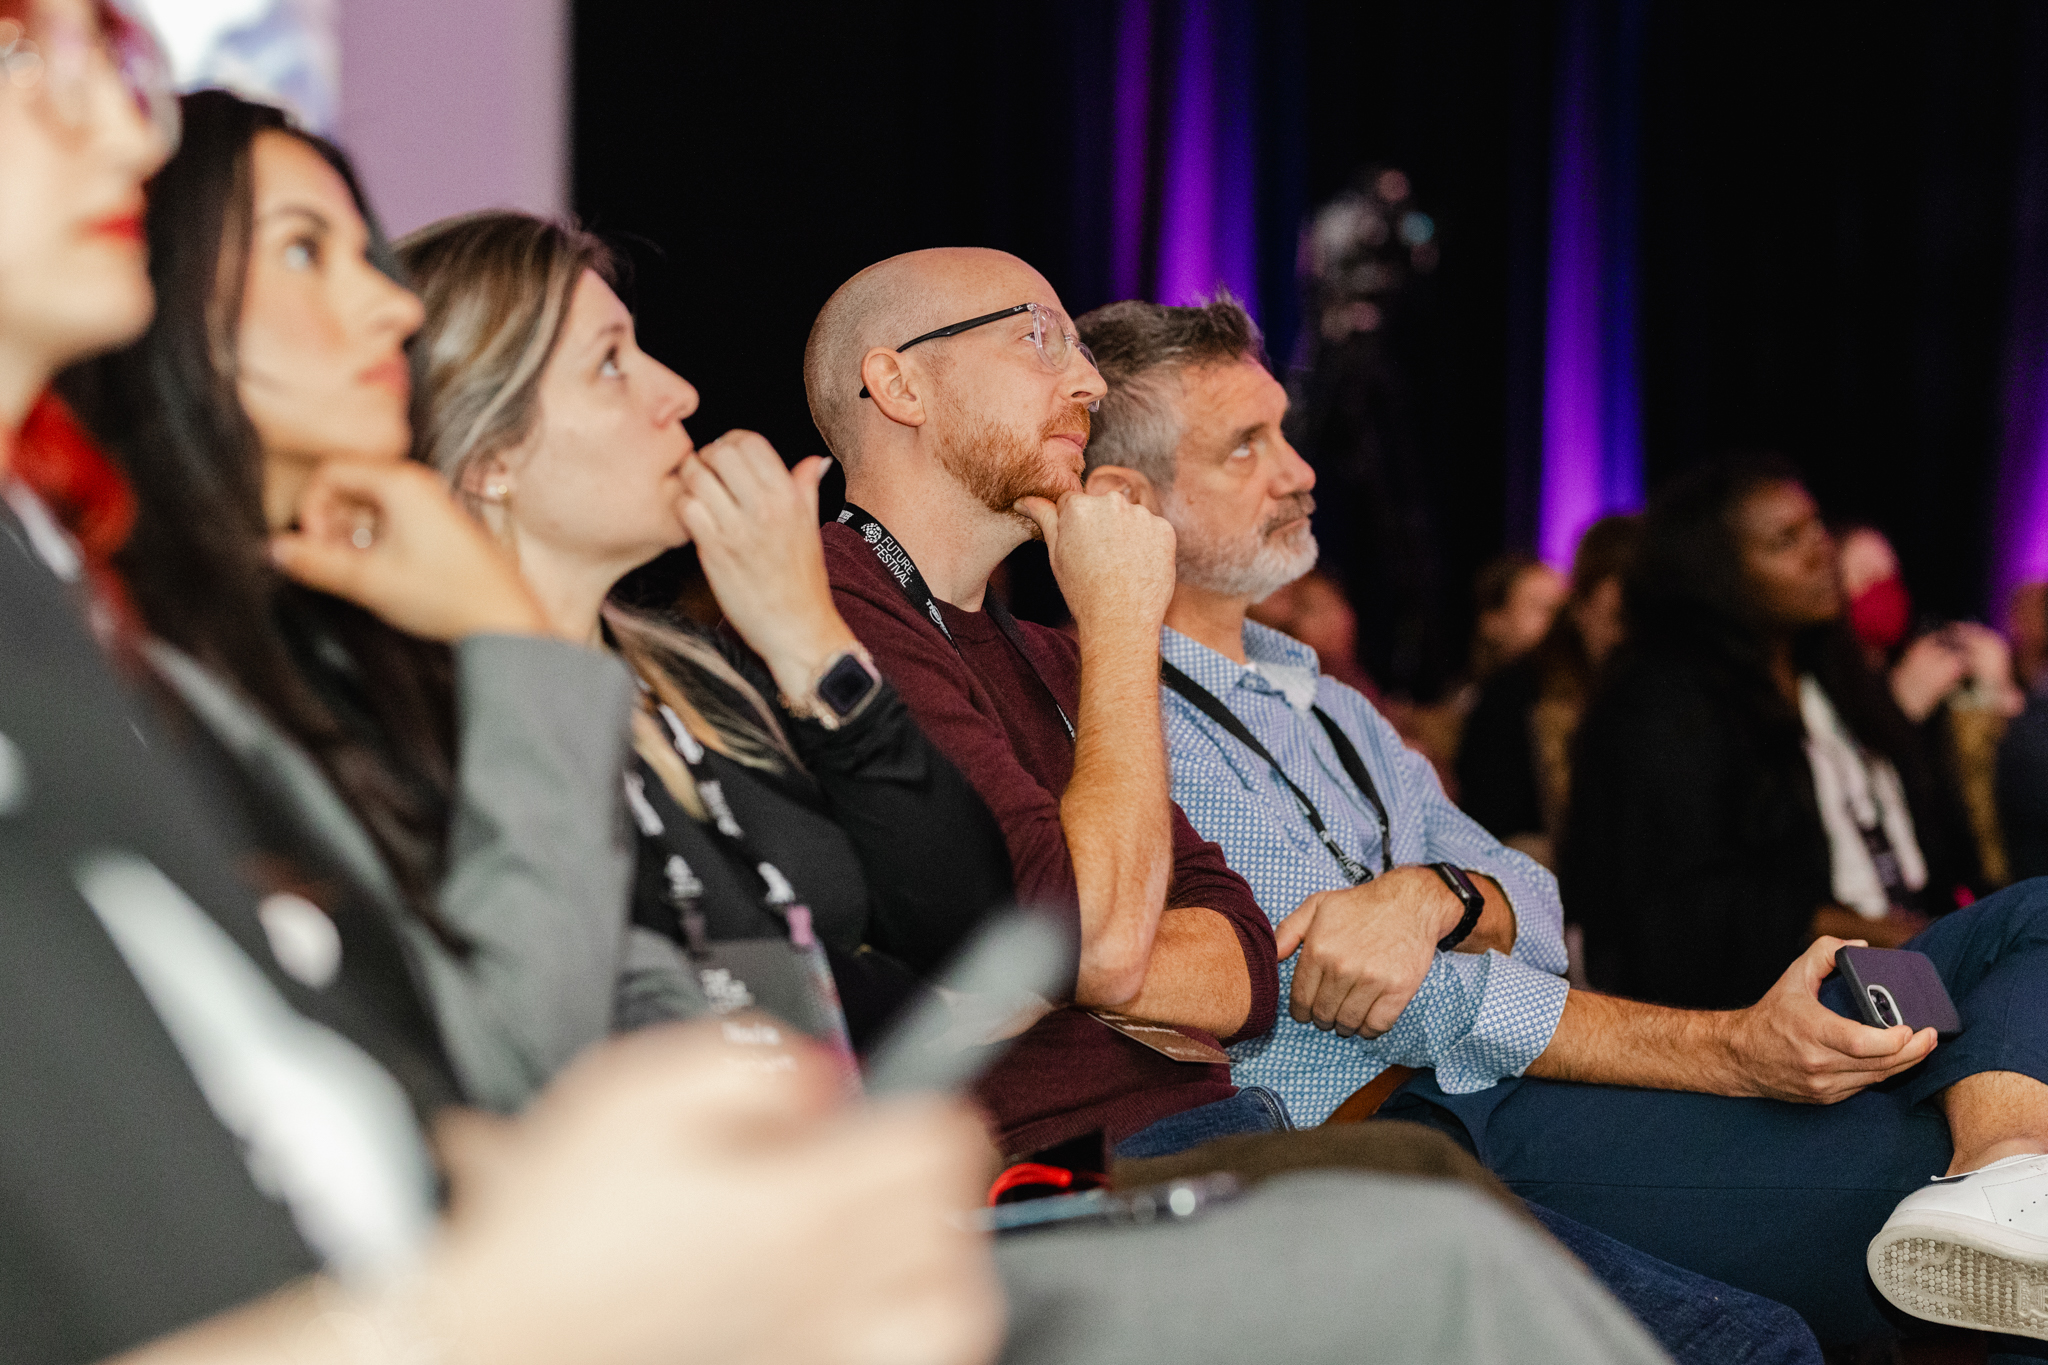 A group of people sitting in the audience at an event.